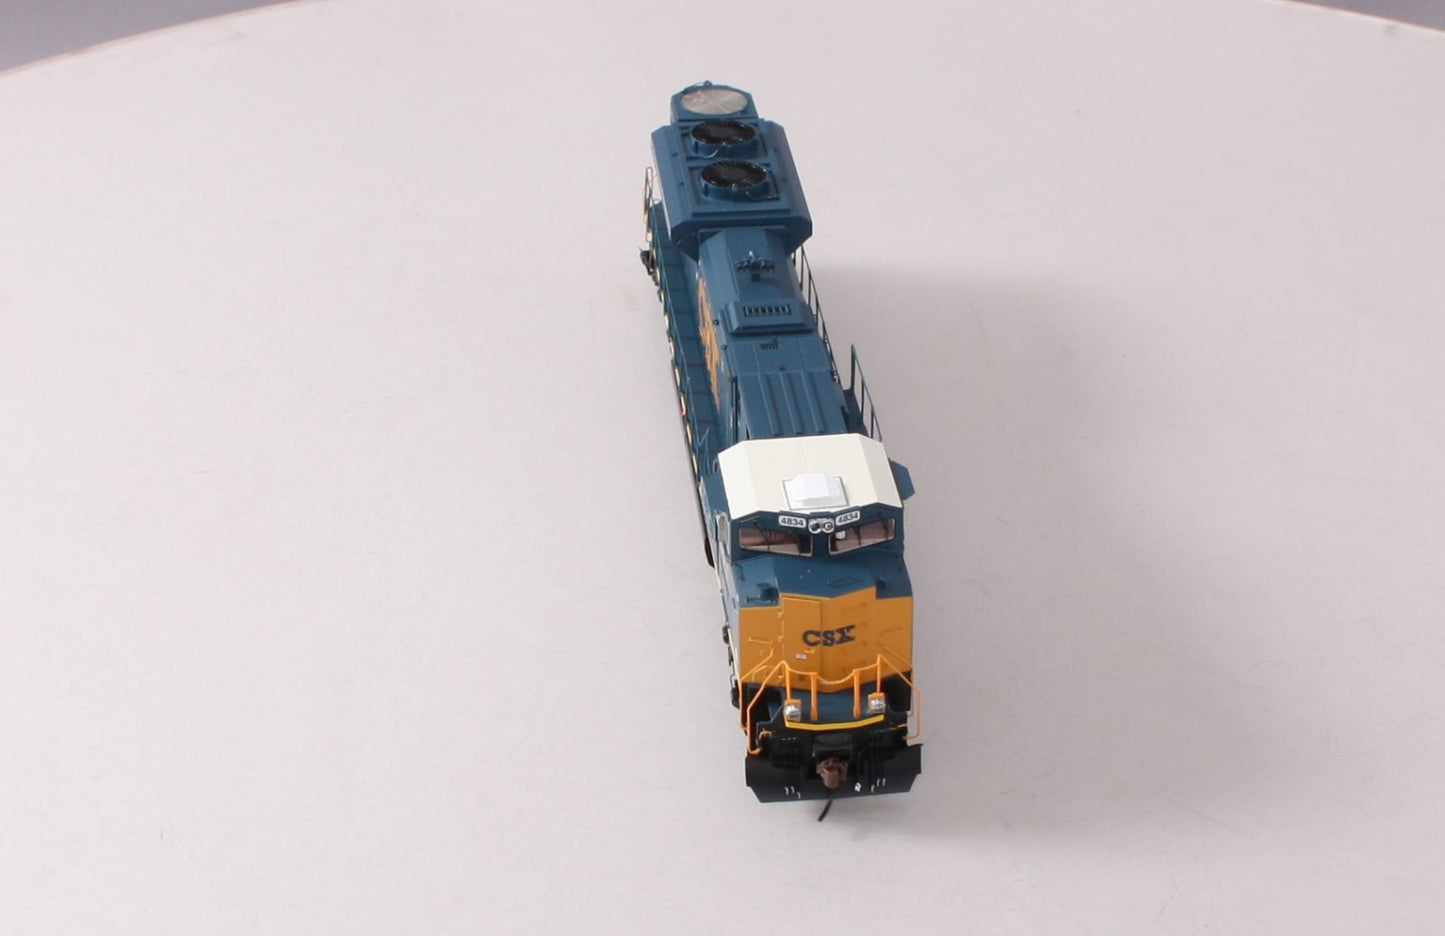 Athearn G68697 HO Scale CSX SD70ACe Diesel Engine #4834 with DCC & Sound